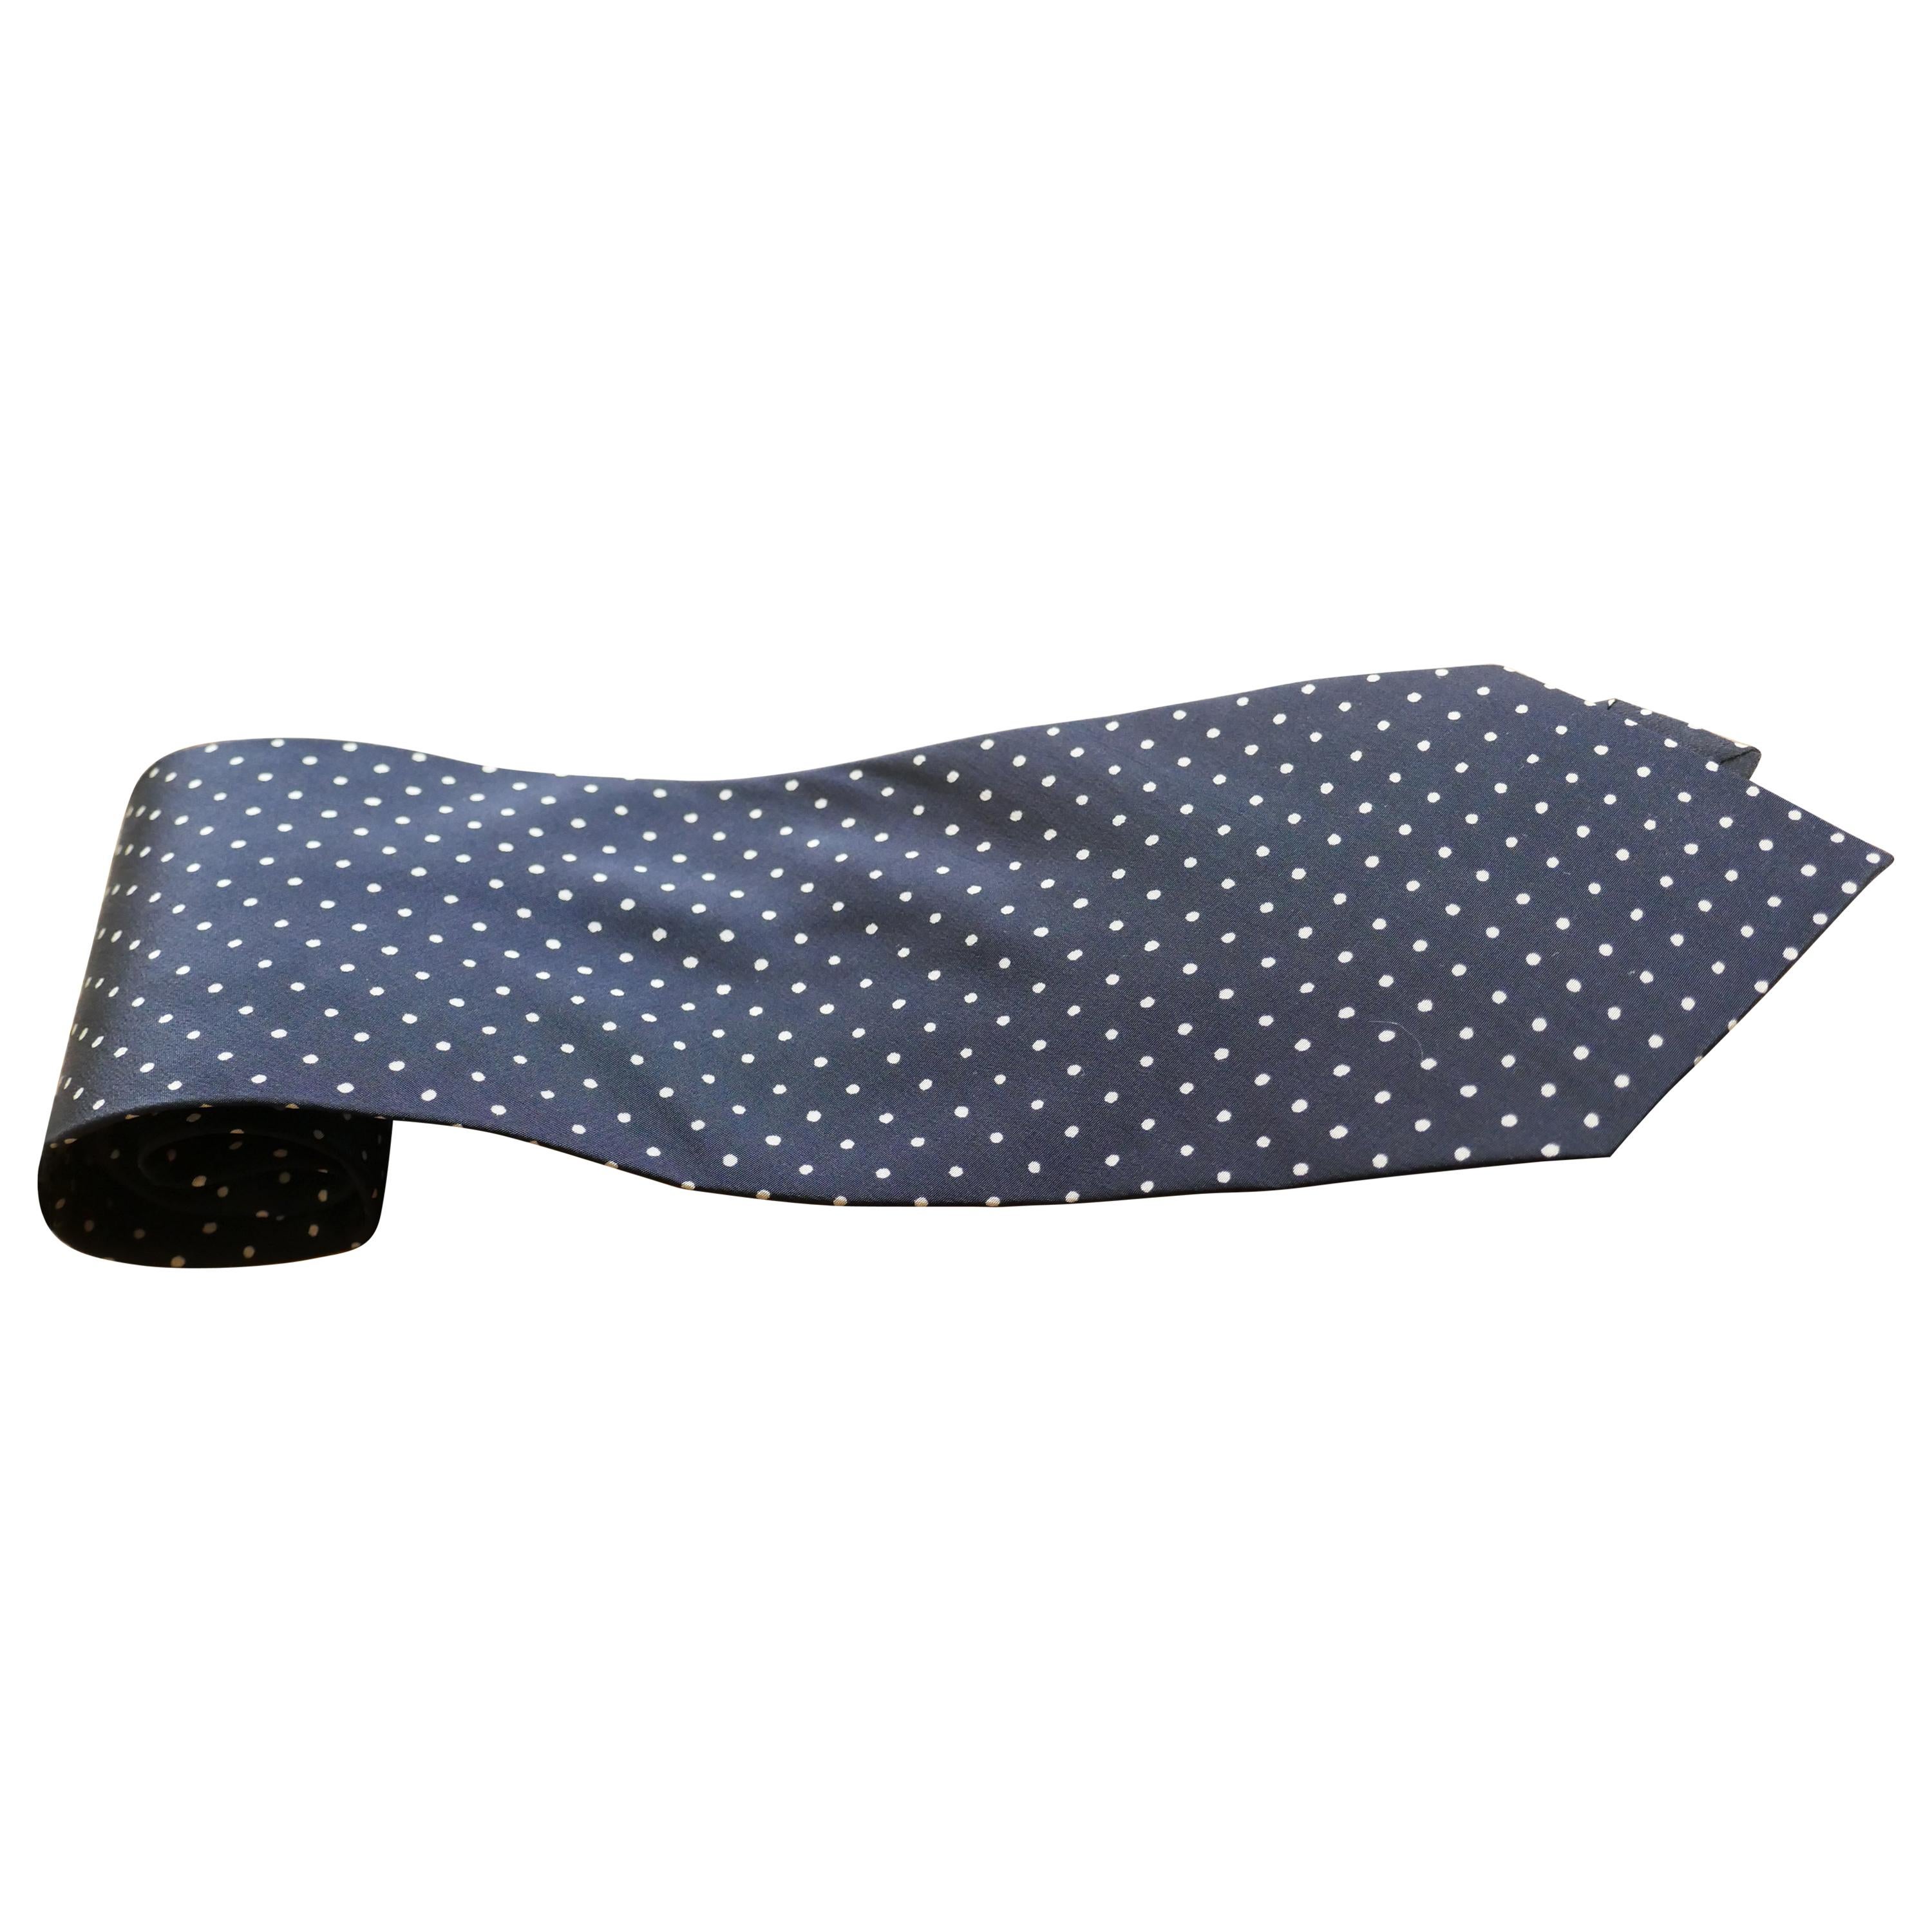 Pop Art Vintage Retro Silk Polka Dot Tie, Classic from 1960s For Sale